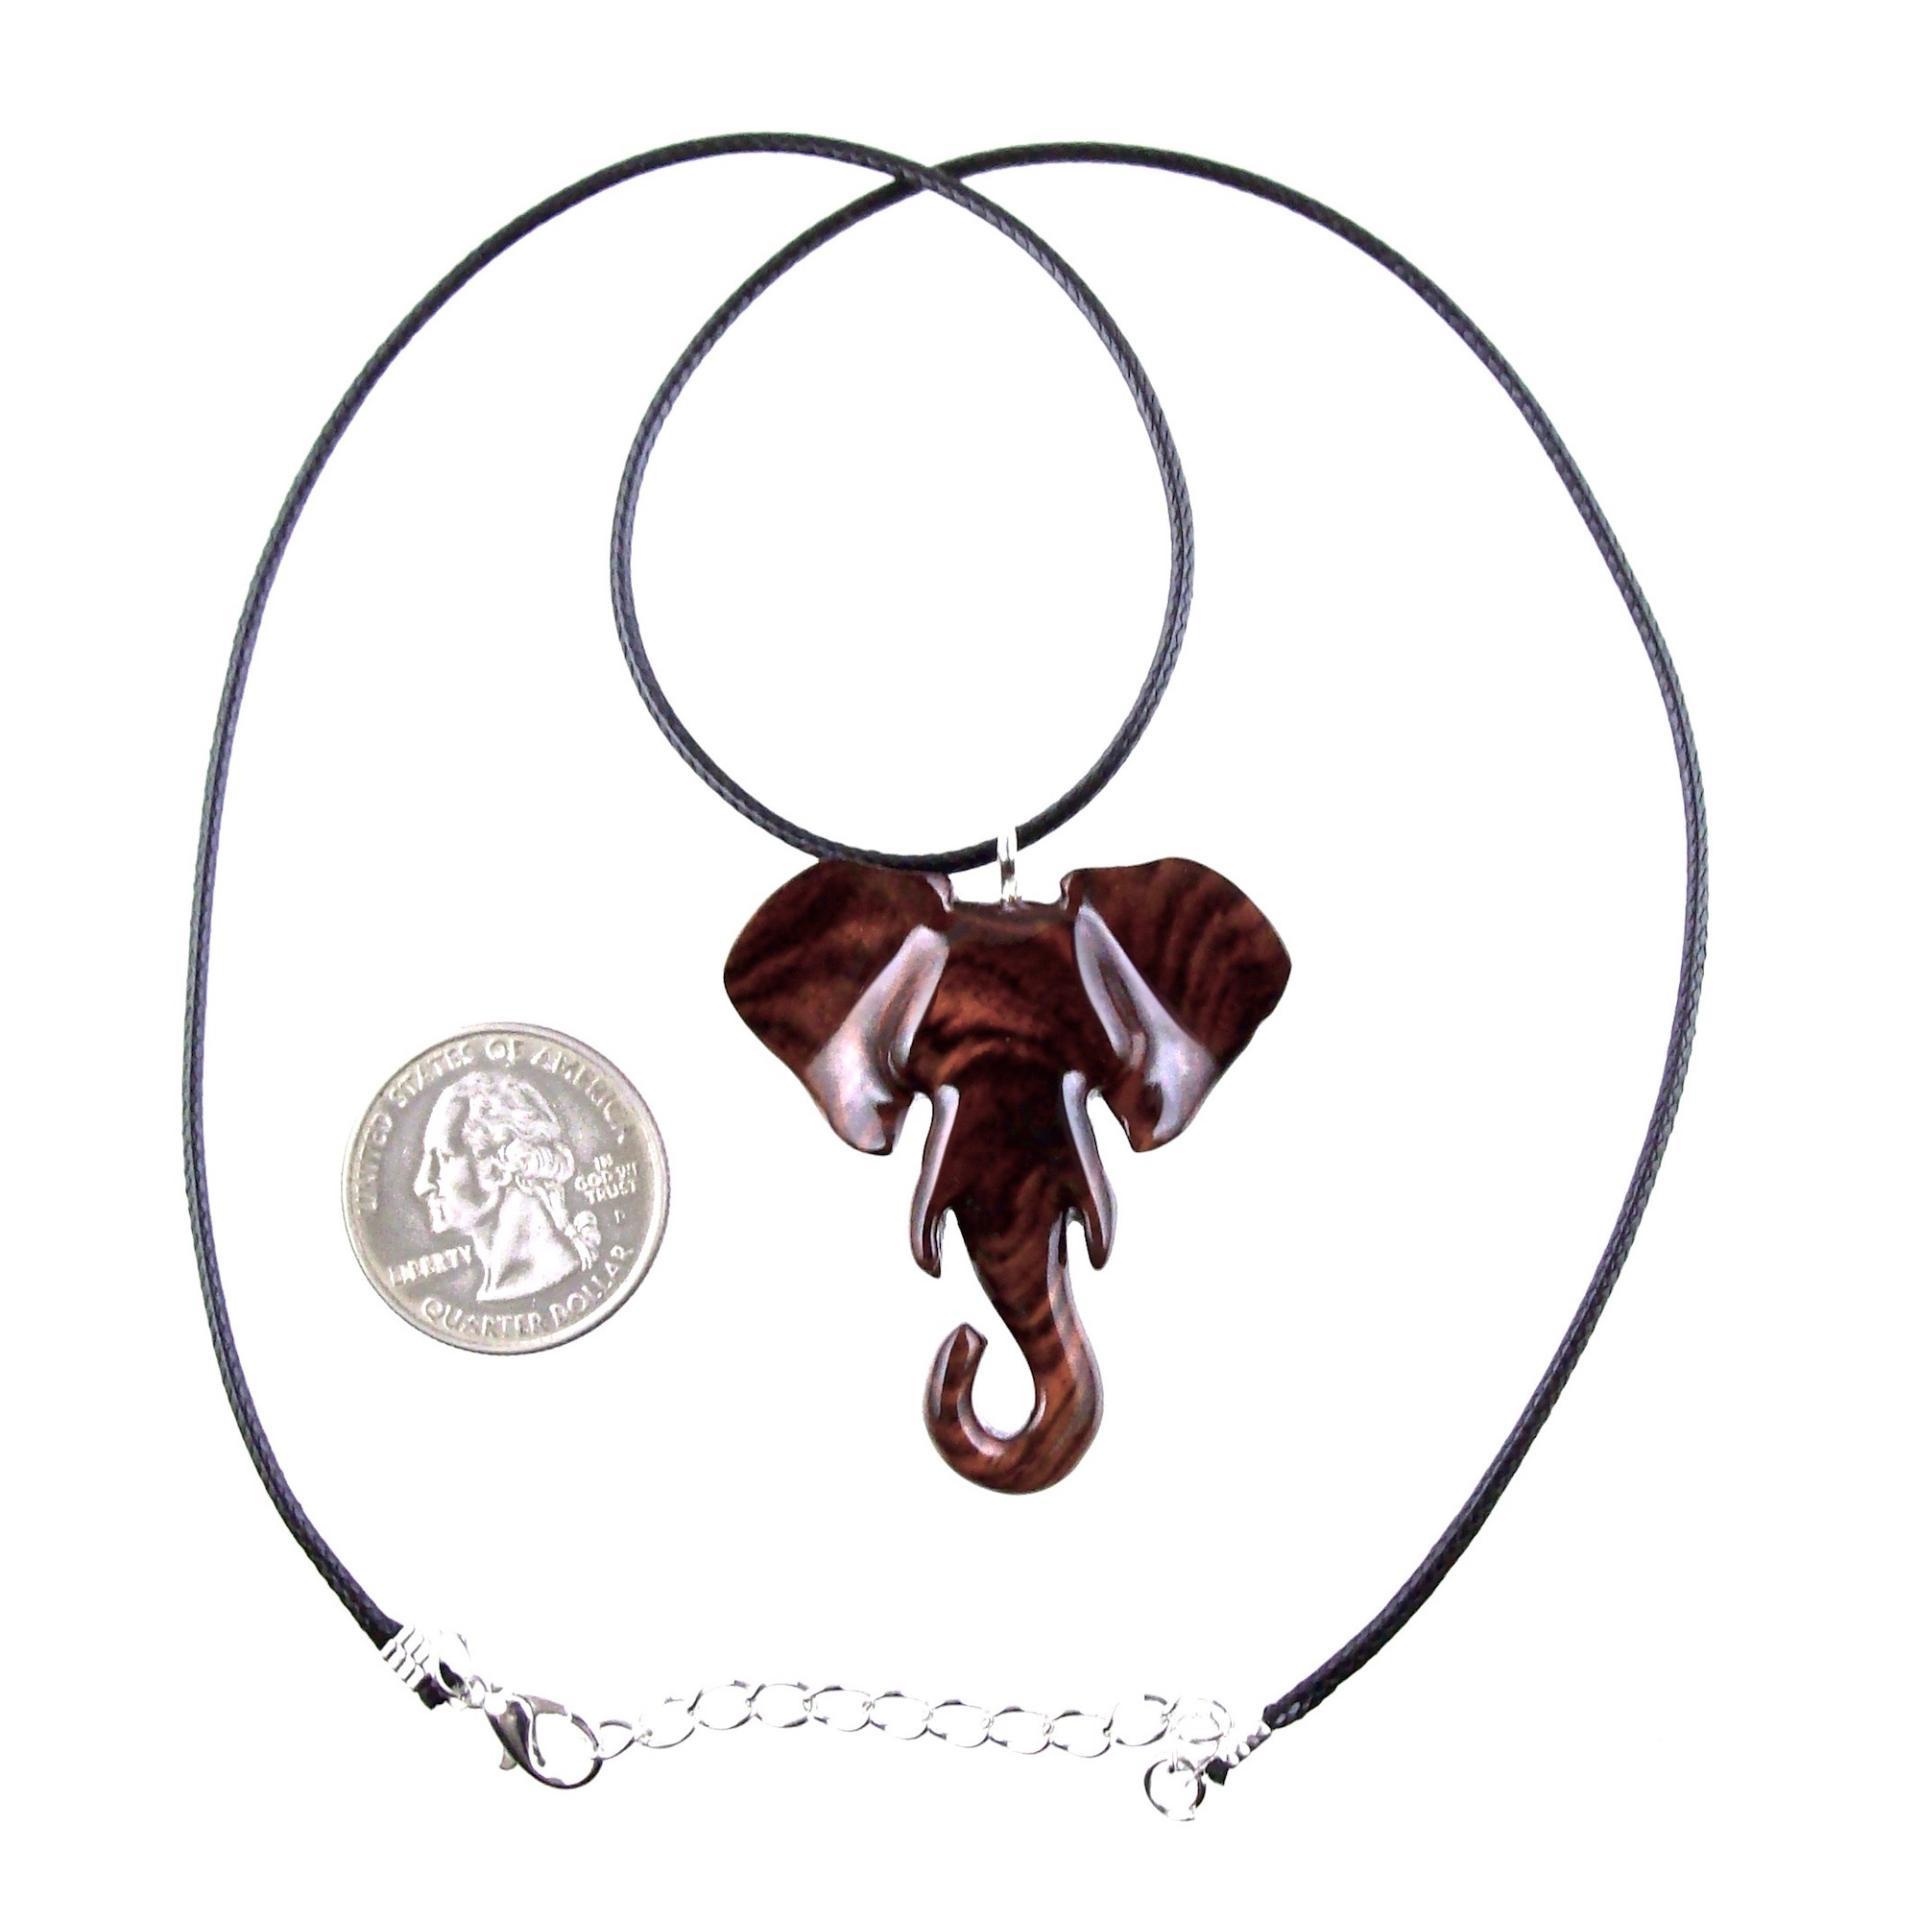 Elephant Necklace, Wooden Elephant Pendant for Men or Women, Hand Carved Spiritual Animal Necklace, Wood Jewelry for Men Women